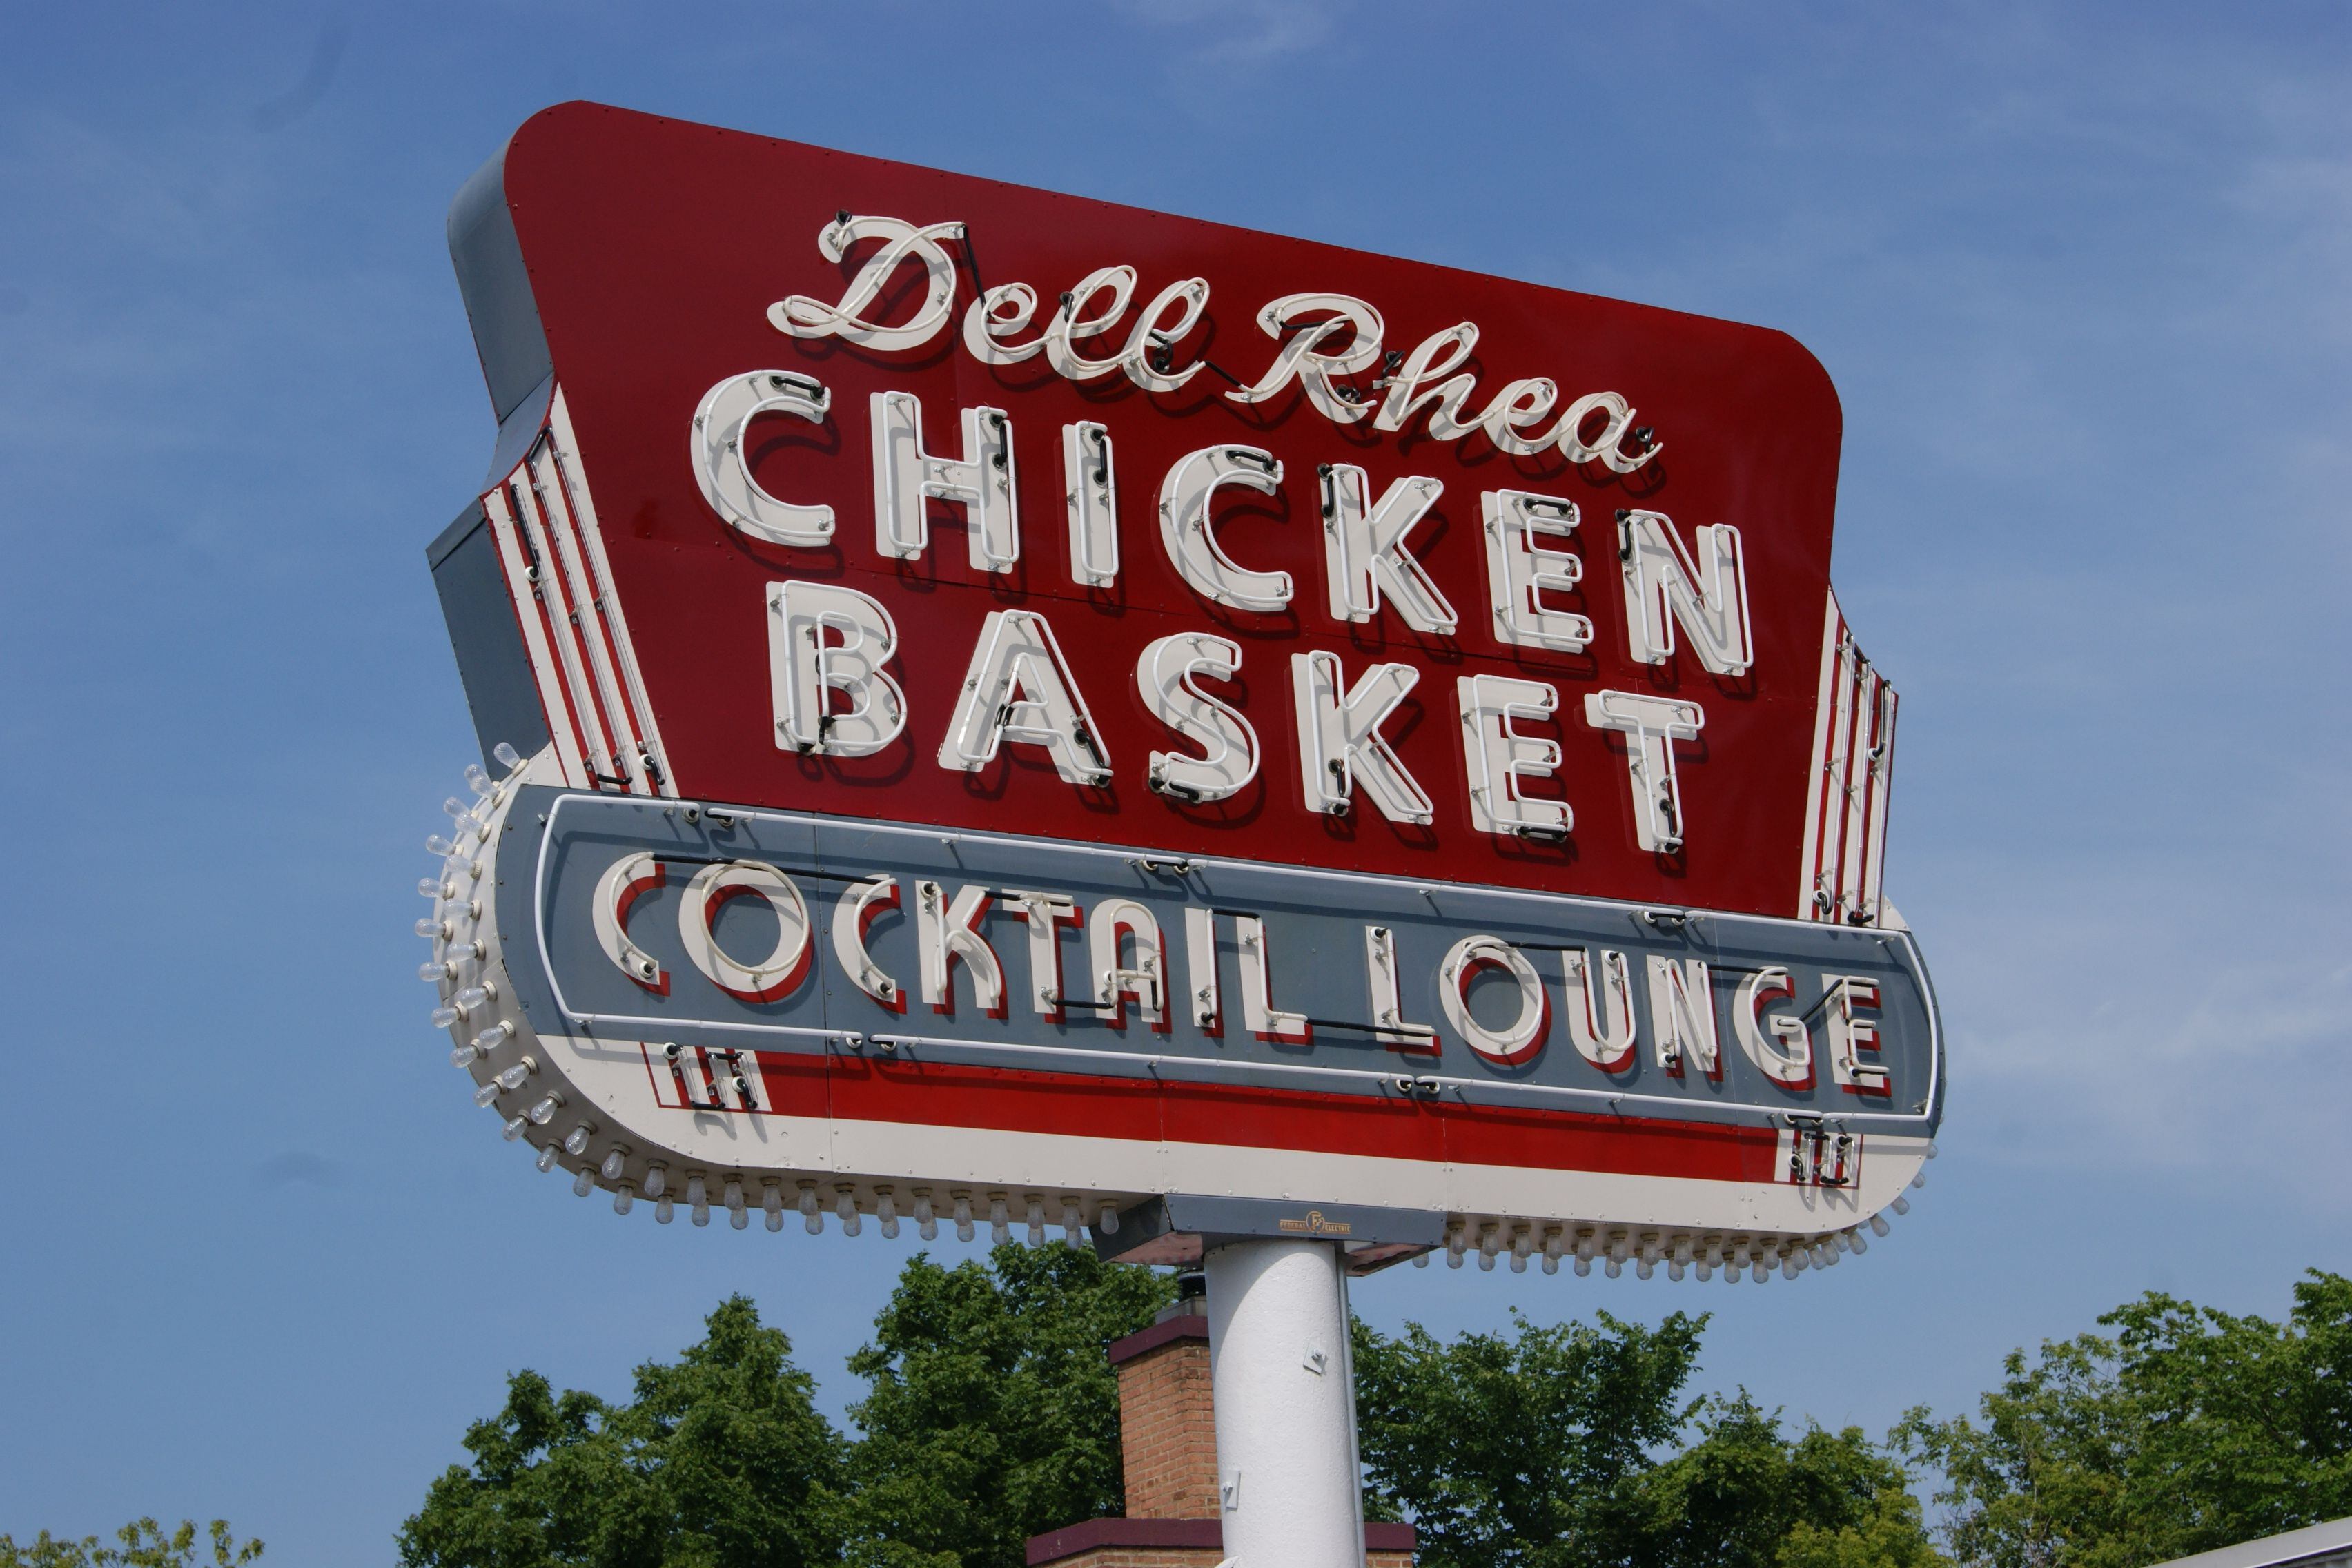 Iconic Eats At Dell Reha's Chicken Basket – The First Hundred Miles